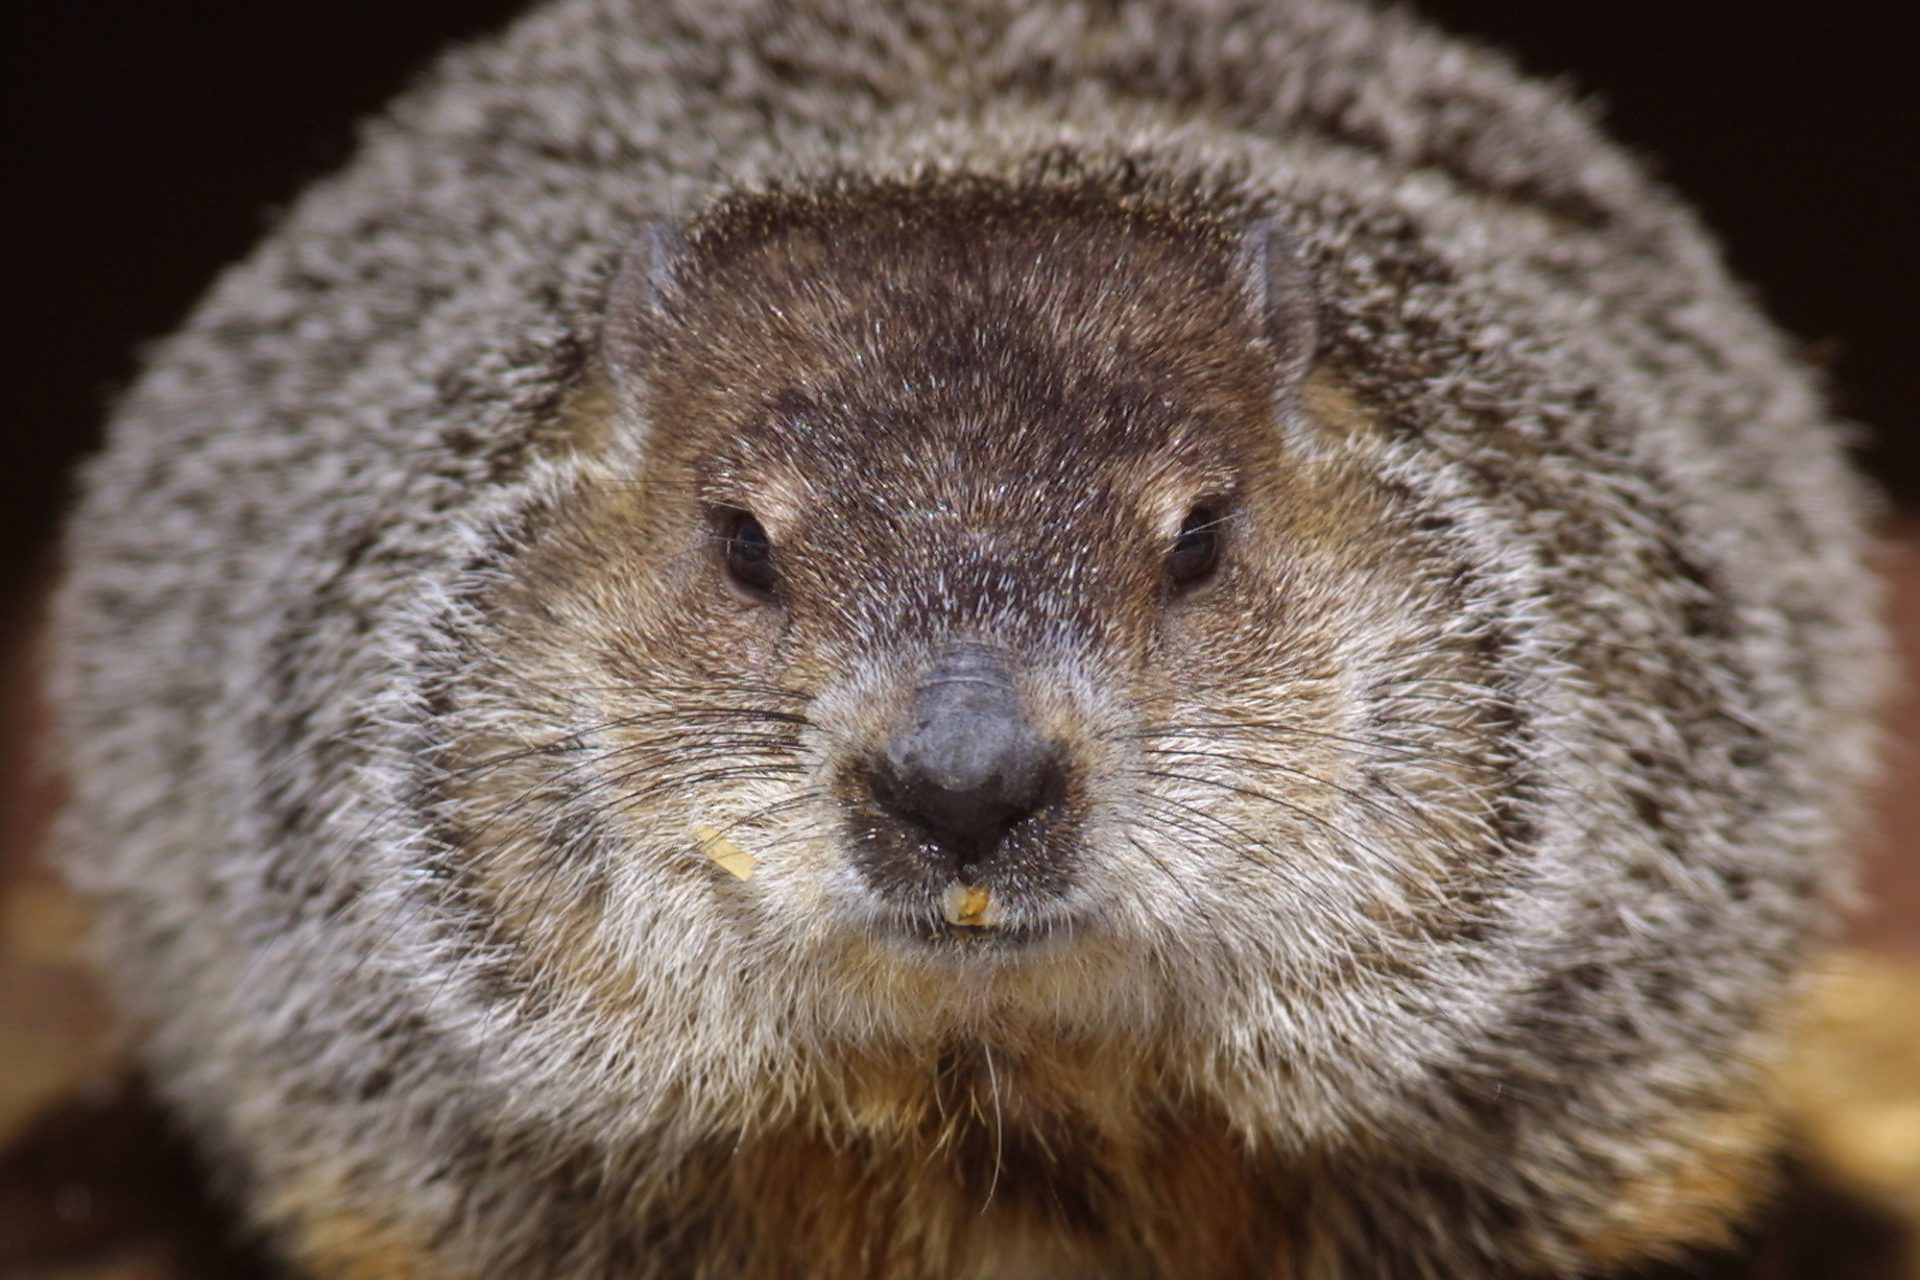 The groundhog isn't great at predicting spring